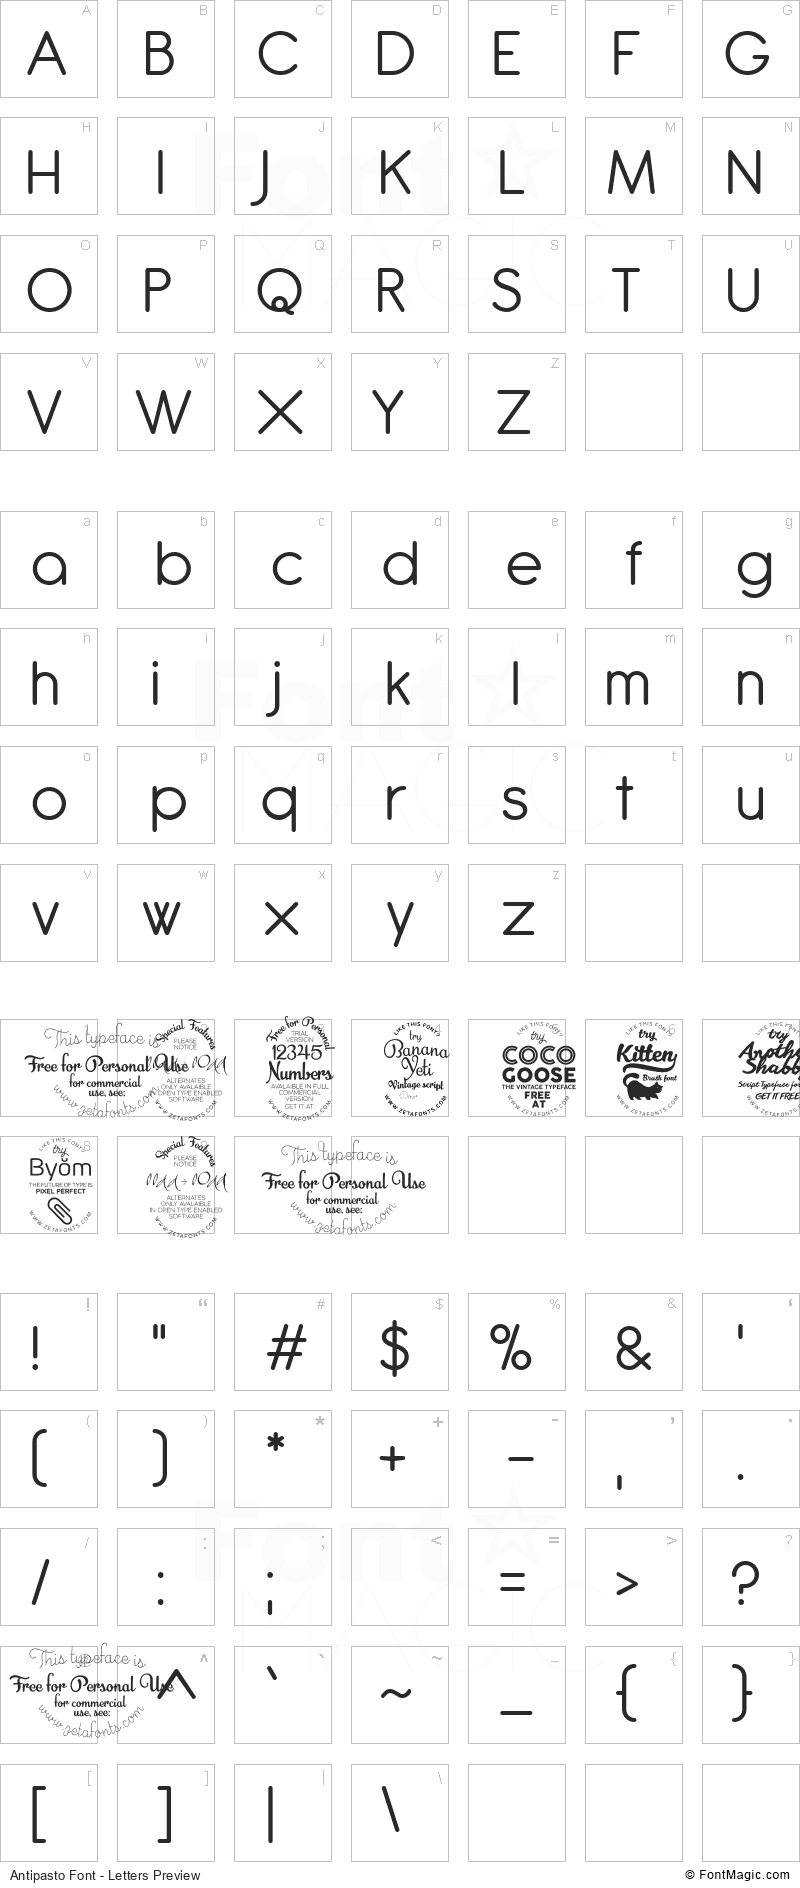 Antipasto Font - All Latters Preview Chart